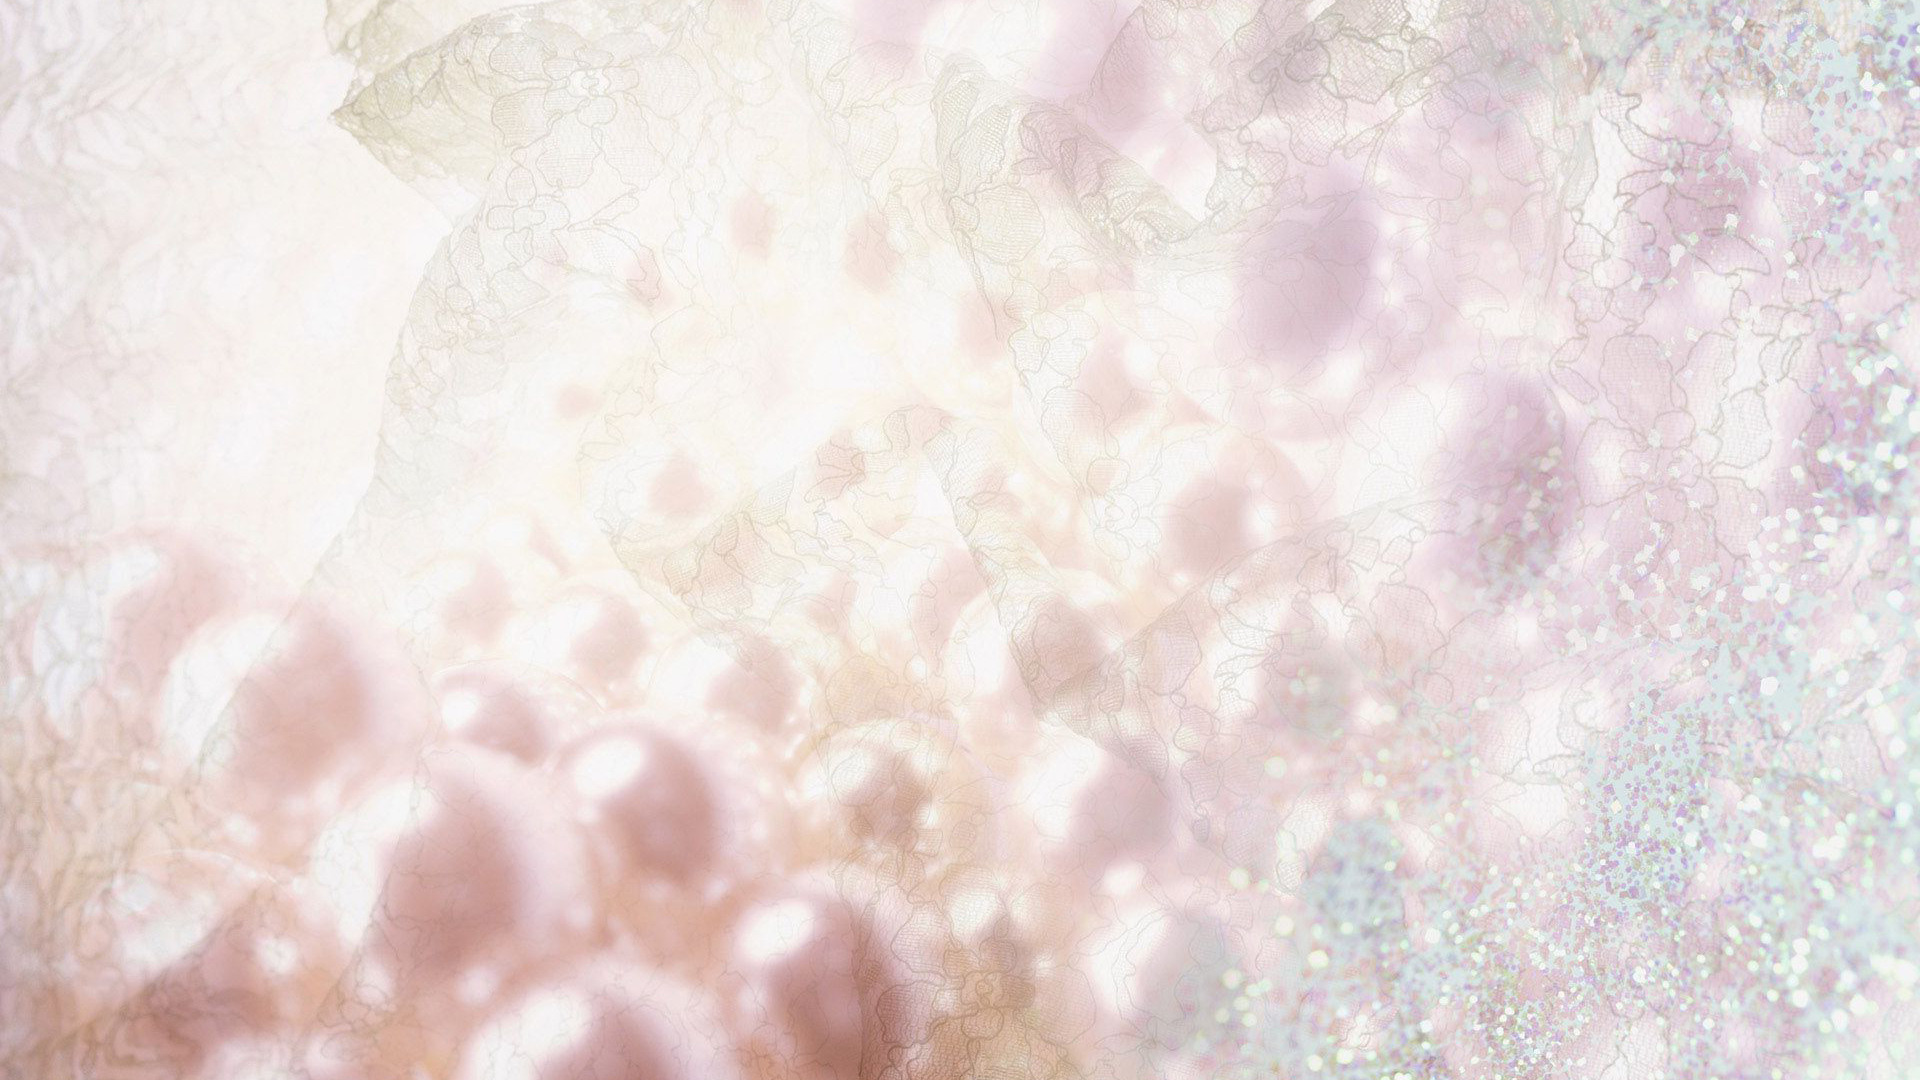 Download Lace and pearls wallpaper 1920x1080